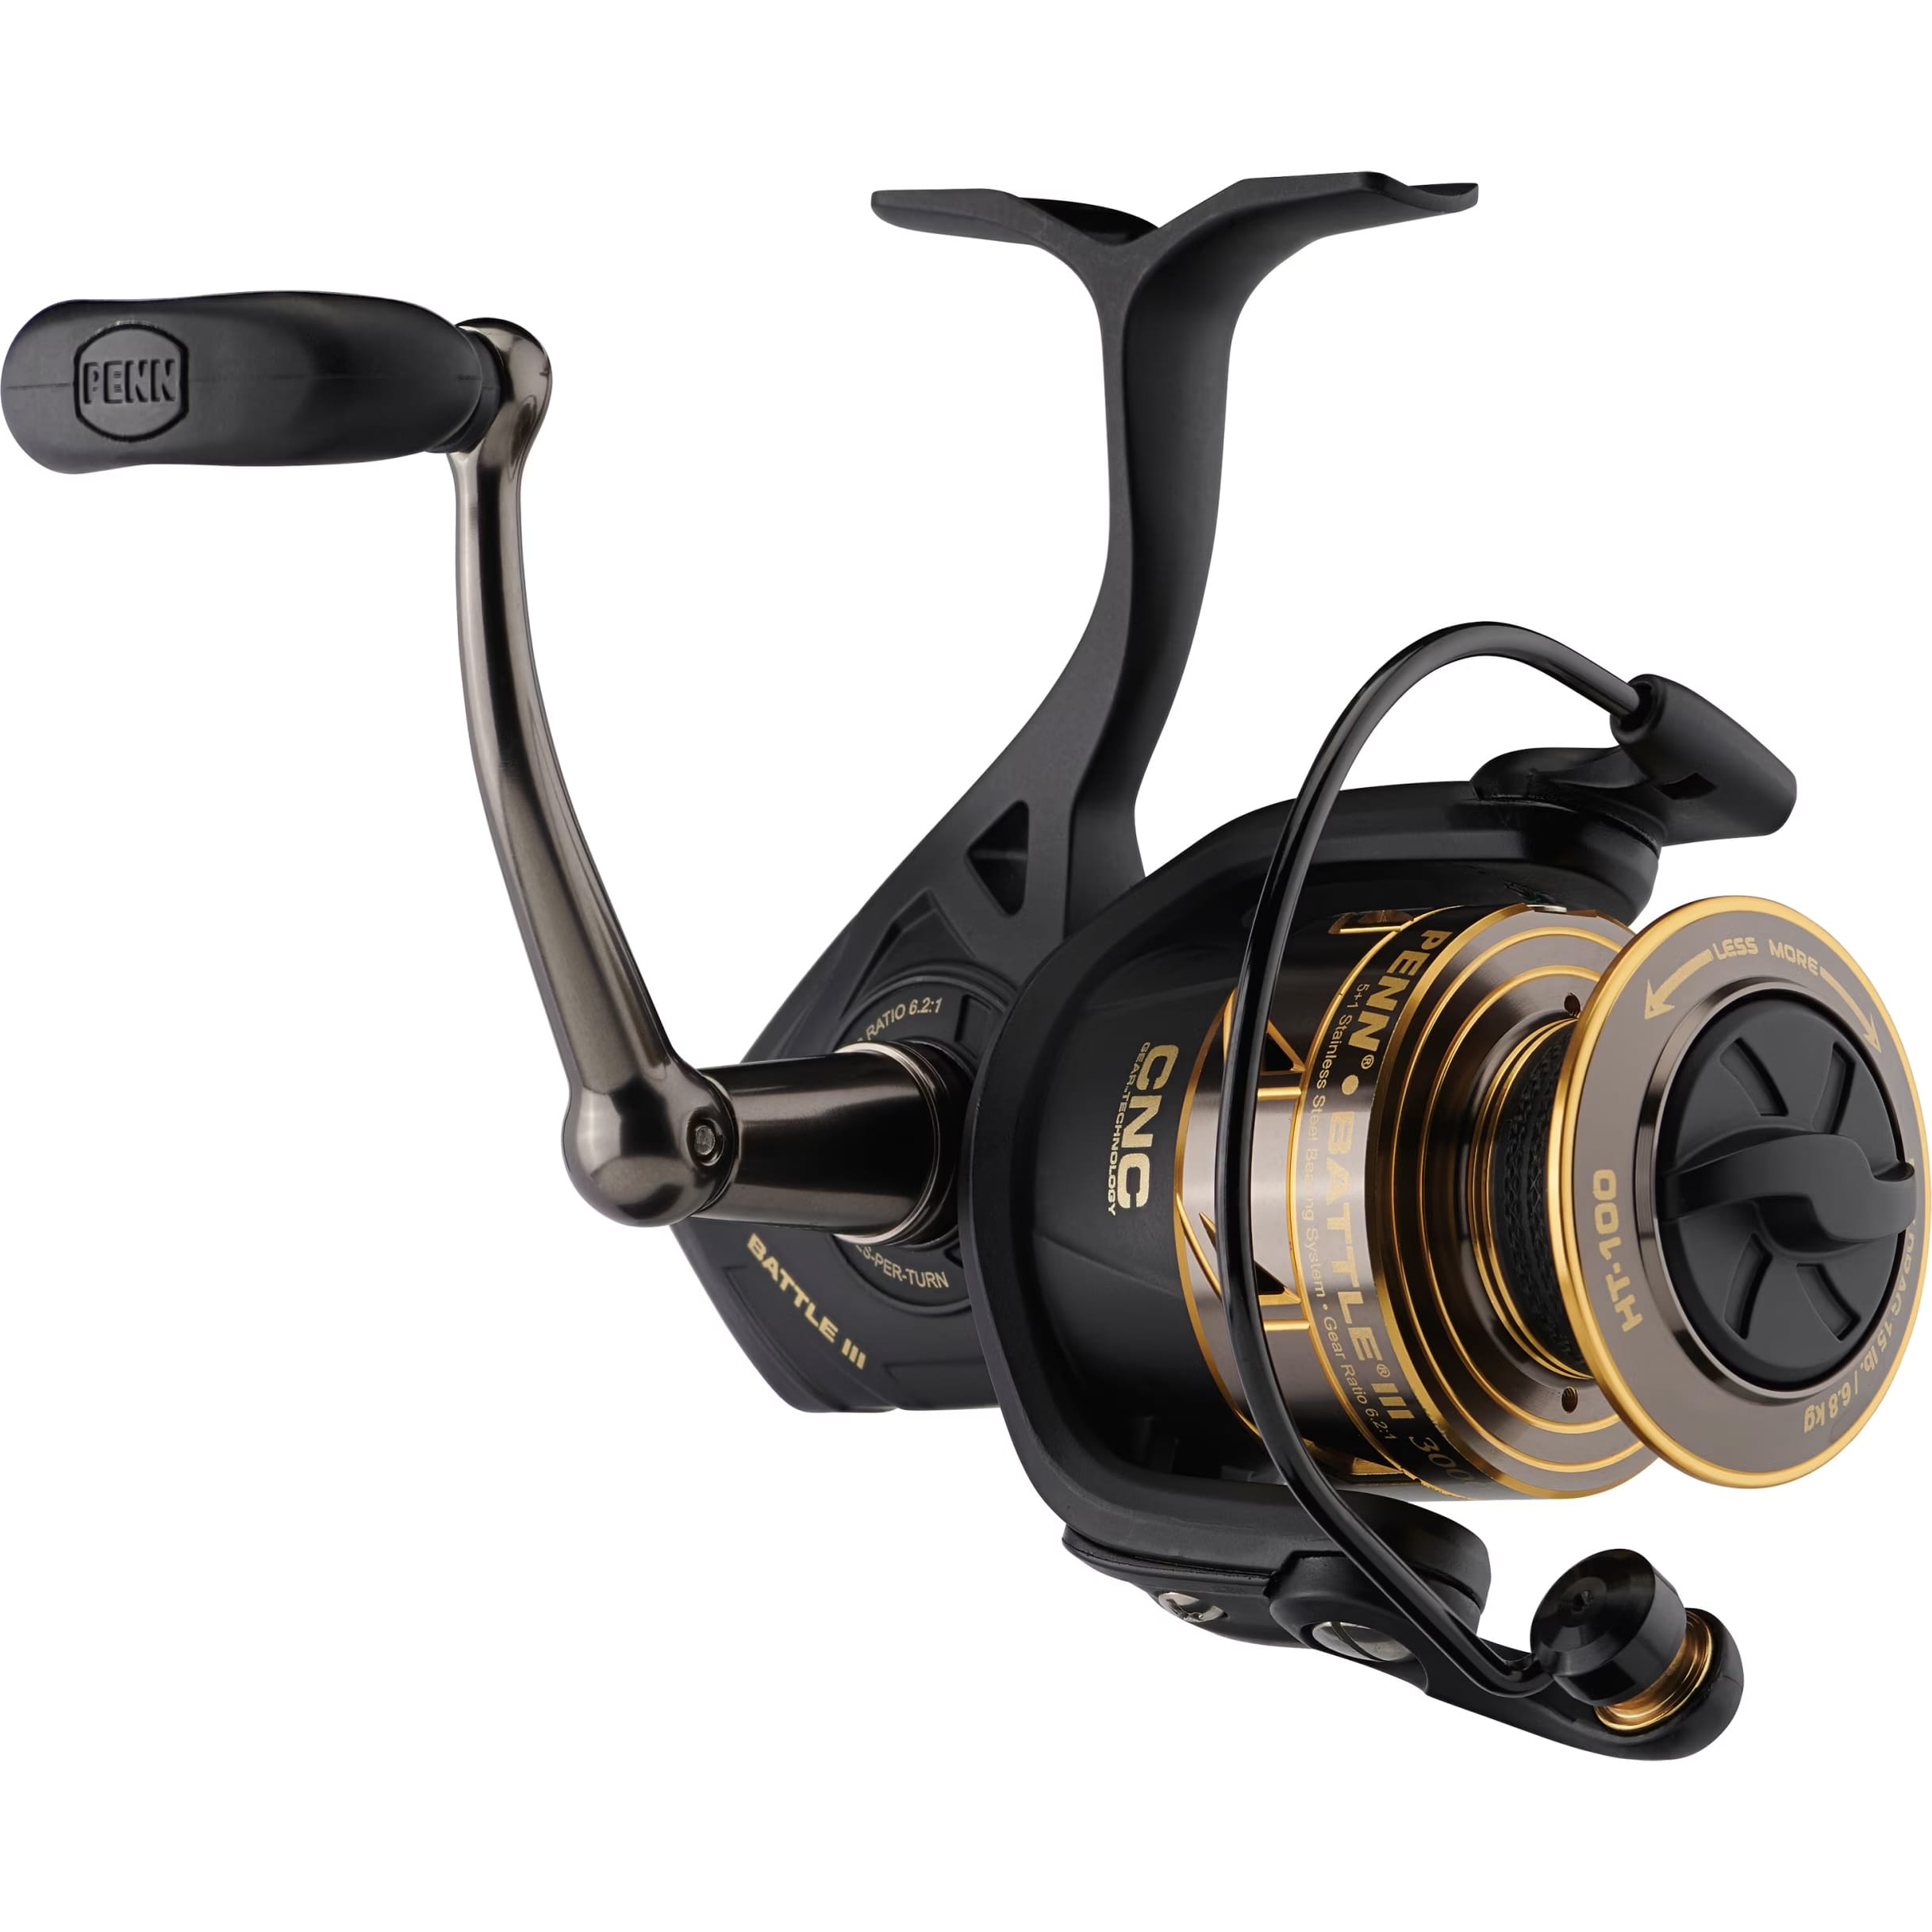 PENN Battle Spinning Reel Kit, Size 3000, Includes Reel Cover and